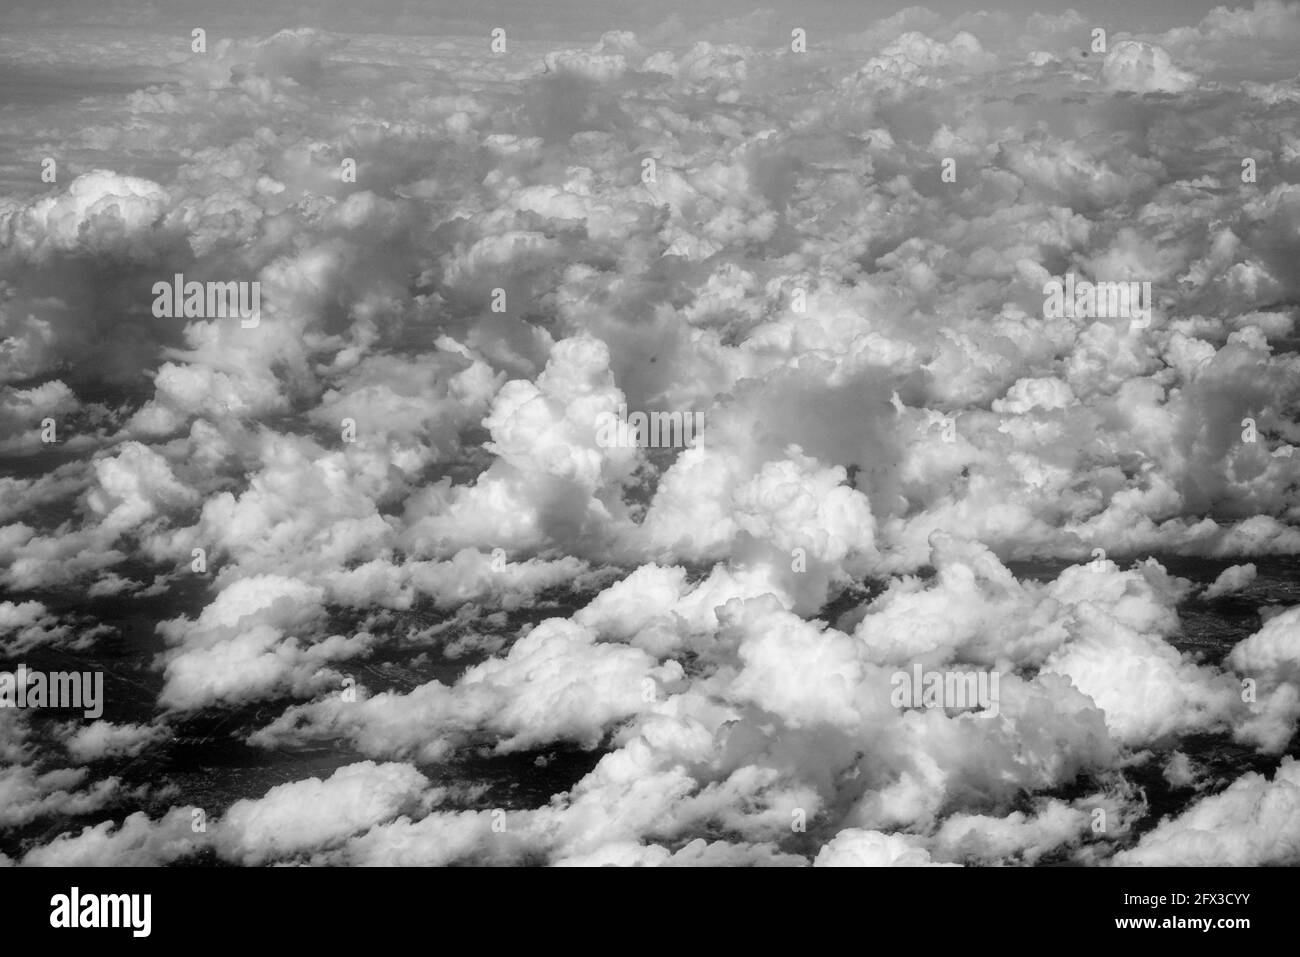 arial view of clouds and skies at 37000 ft, Thursday, May 9, 2019. Photo by Jennifer Graylock-Graylock.com 917-519-7666 Stock Photo